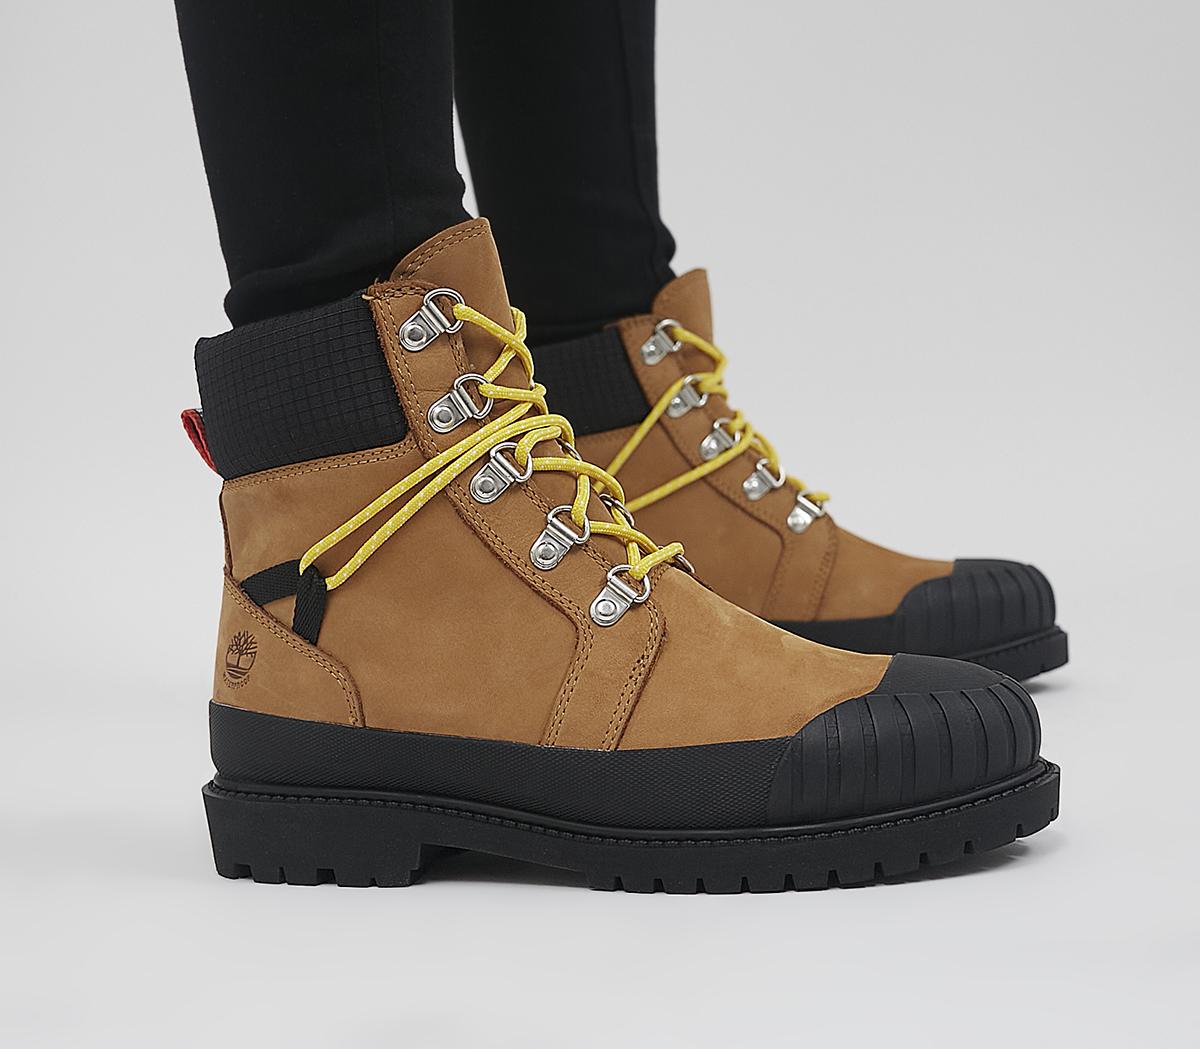 Timberland 6 Inch Heritage Rubber Toe Boots Wheat - Women's Hiker Boots